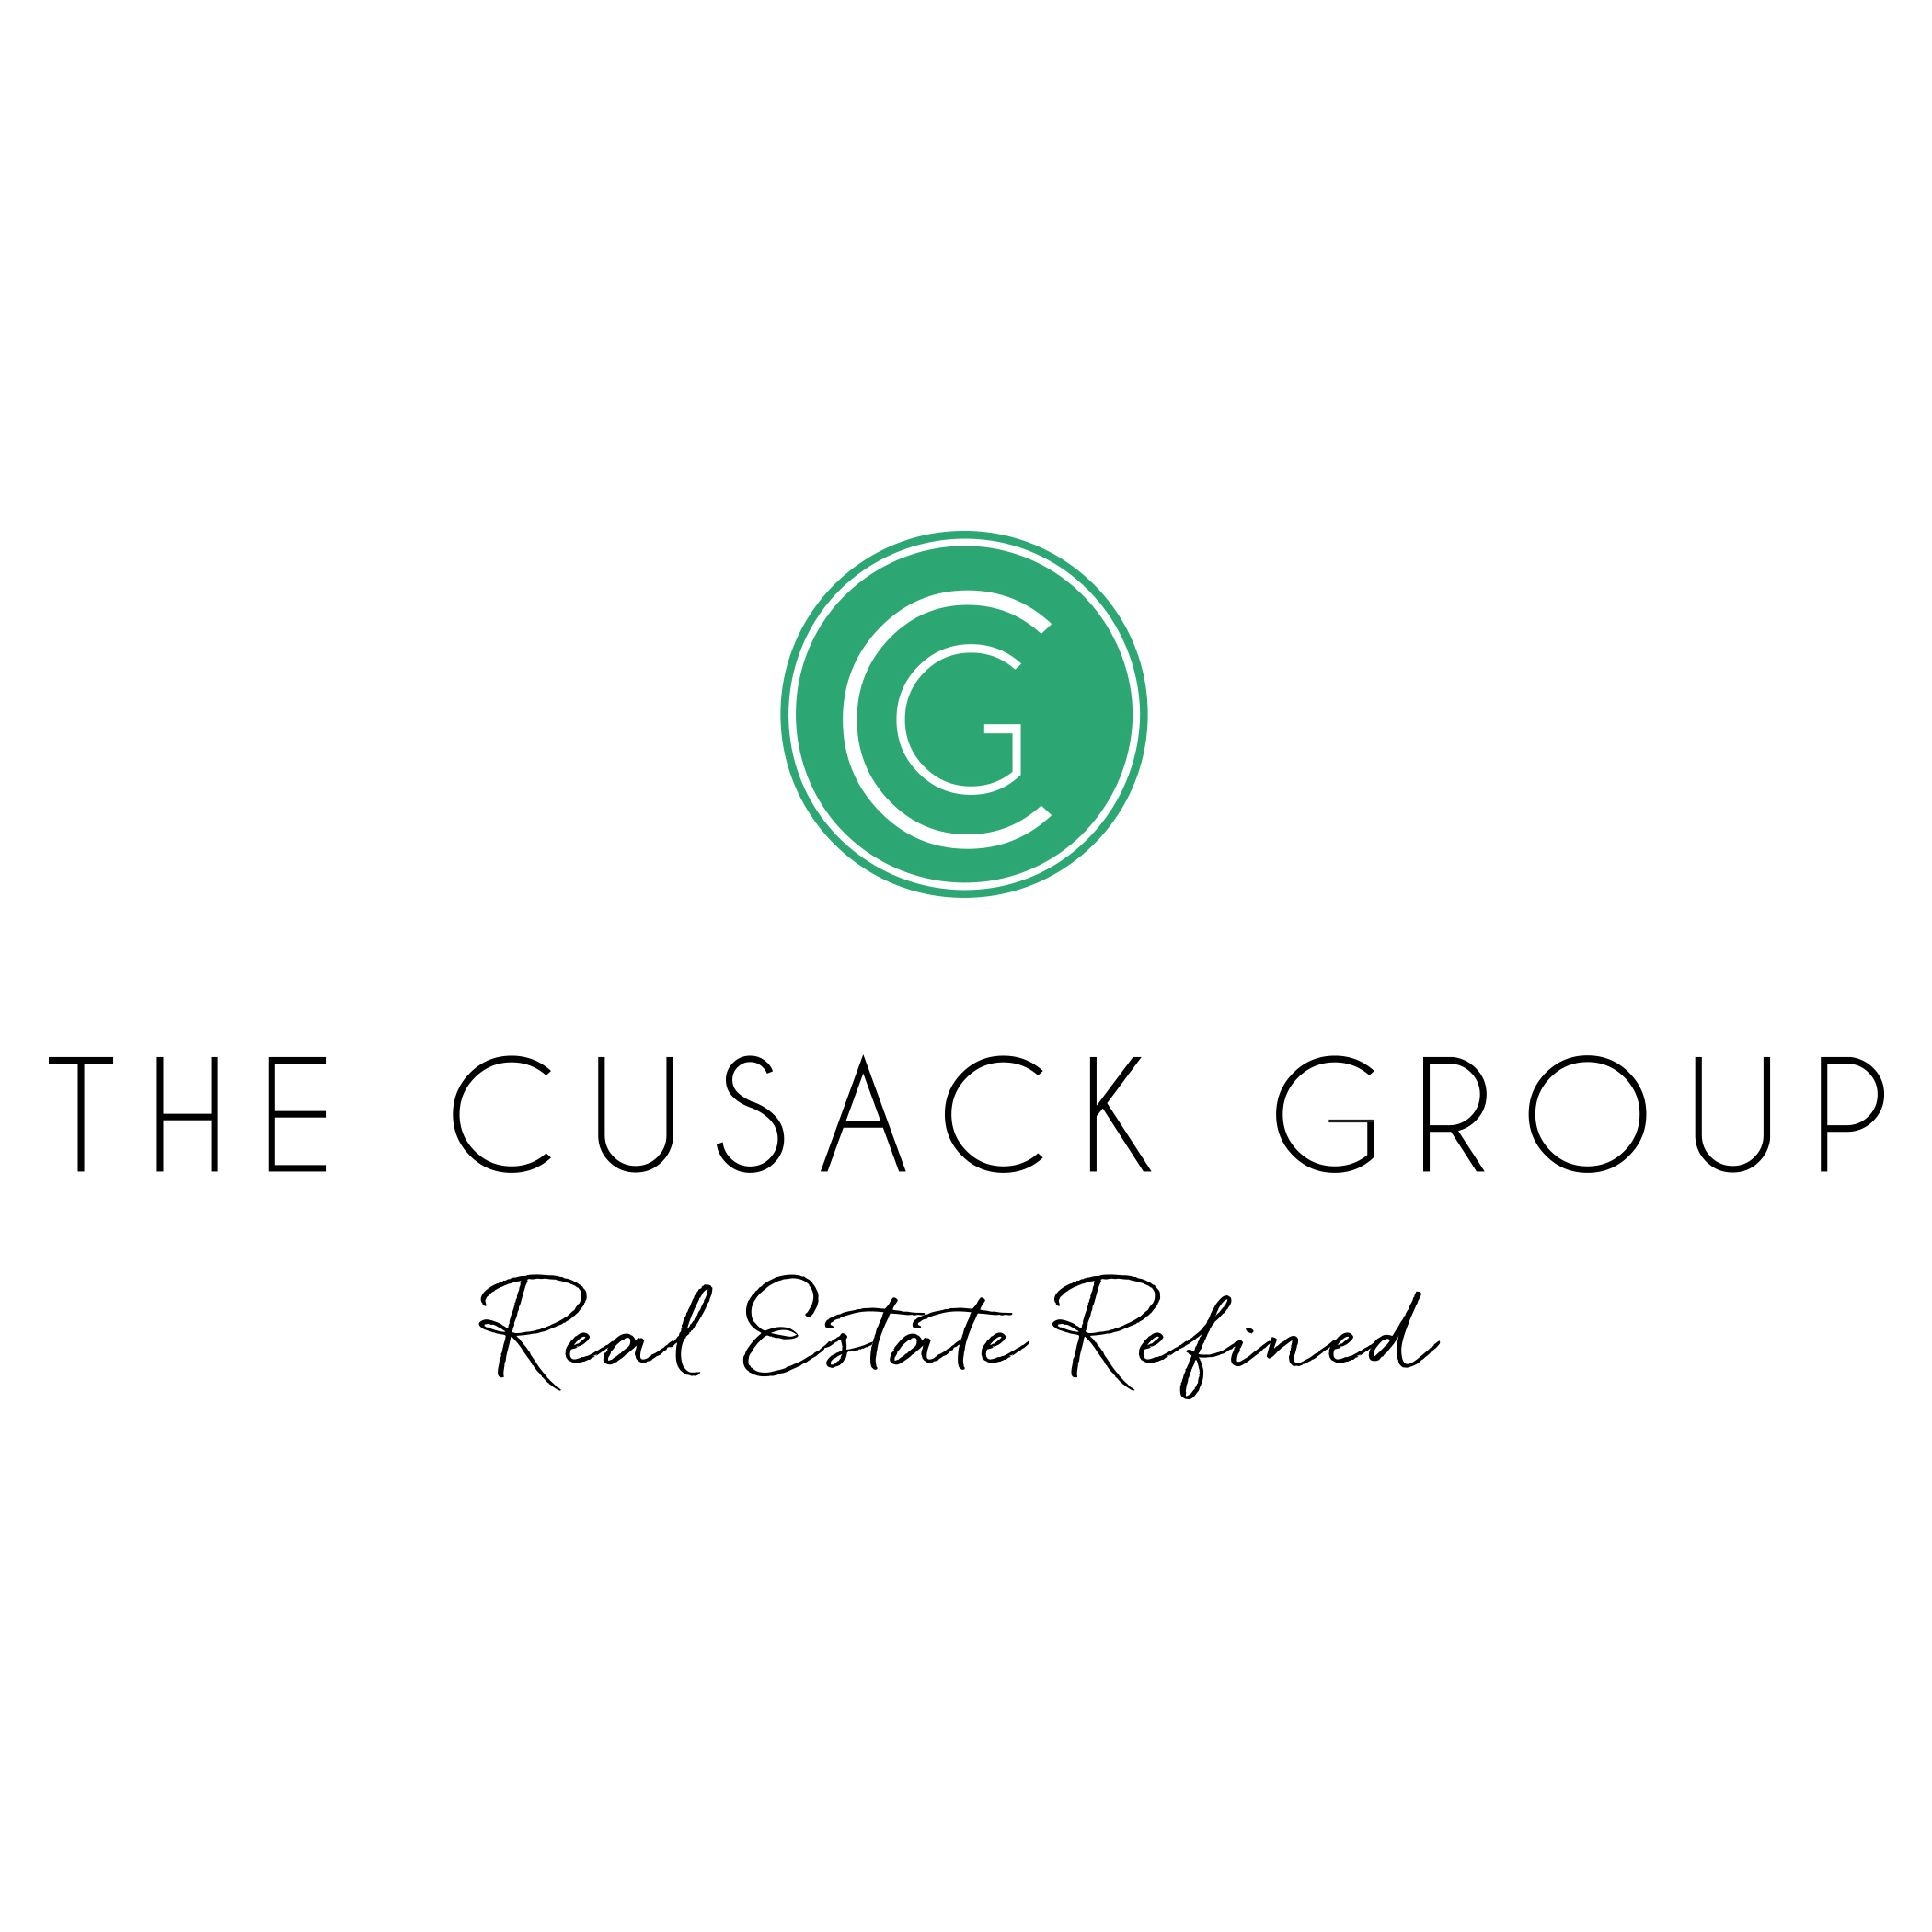 The Cusack Group